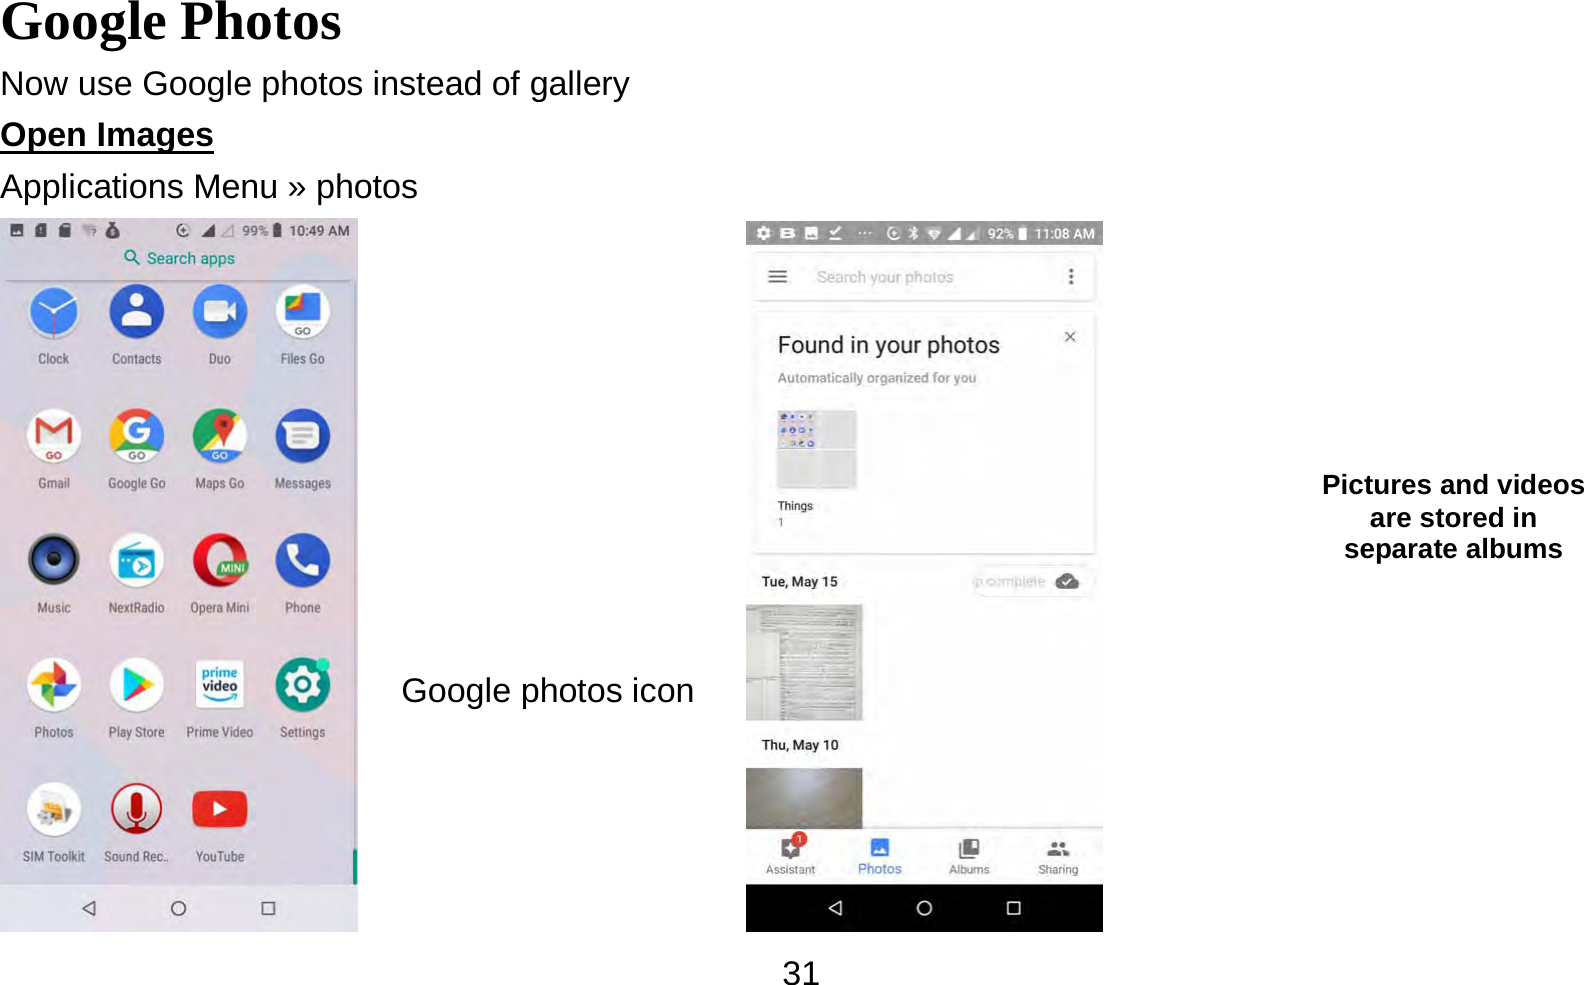   31Google Photos                                        Now use Google photos instead of gallery Open Images                                                                                      Applications Menu » photos                 Pictures and videos are stored in separate albums Google photos icon 